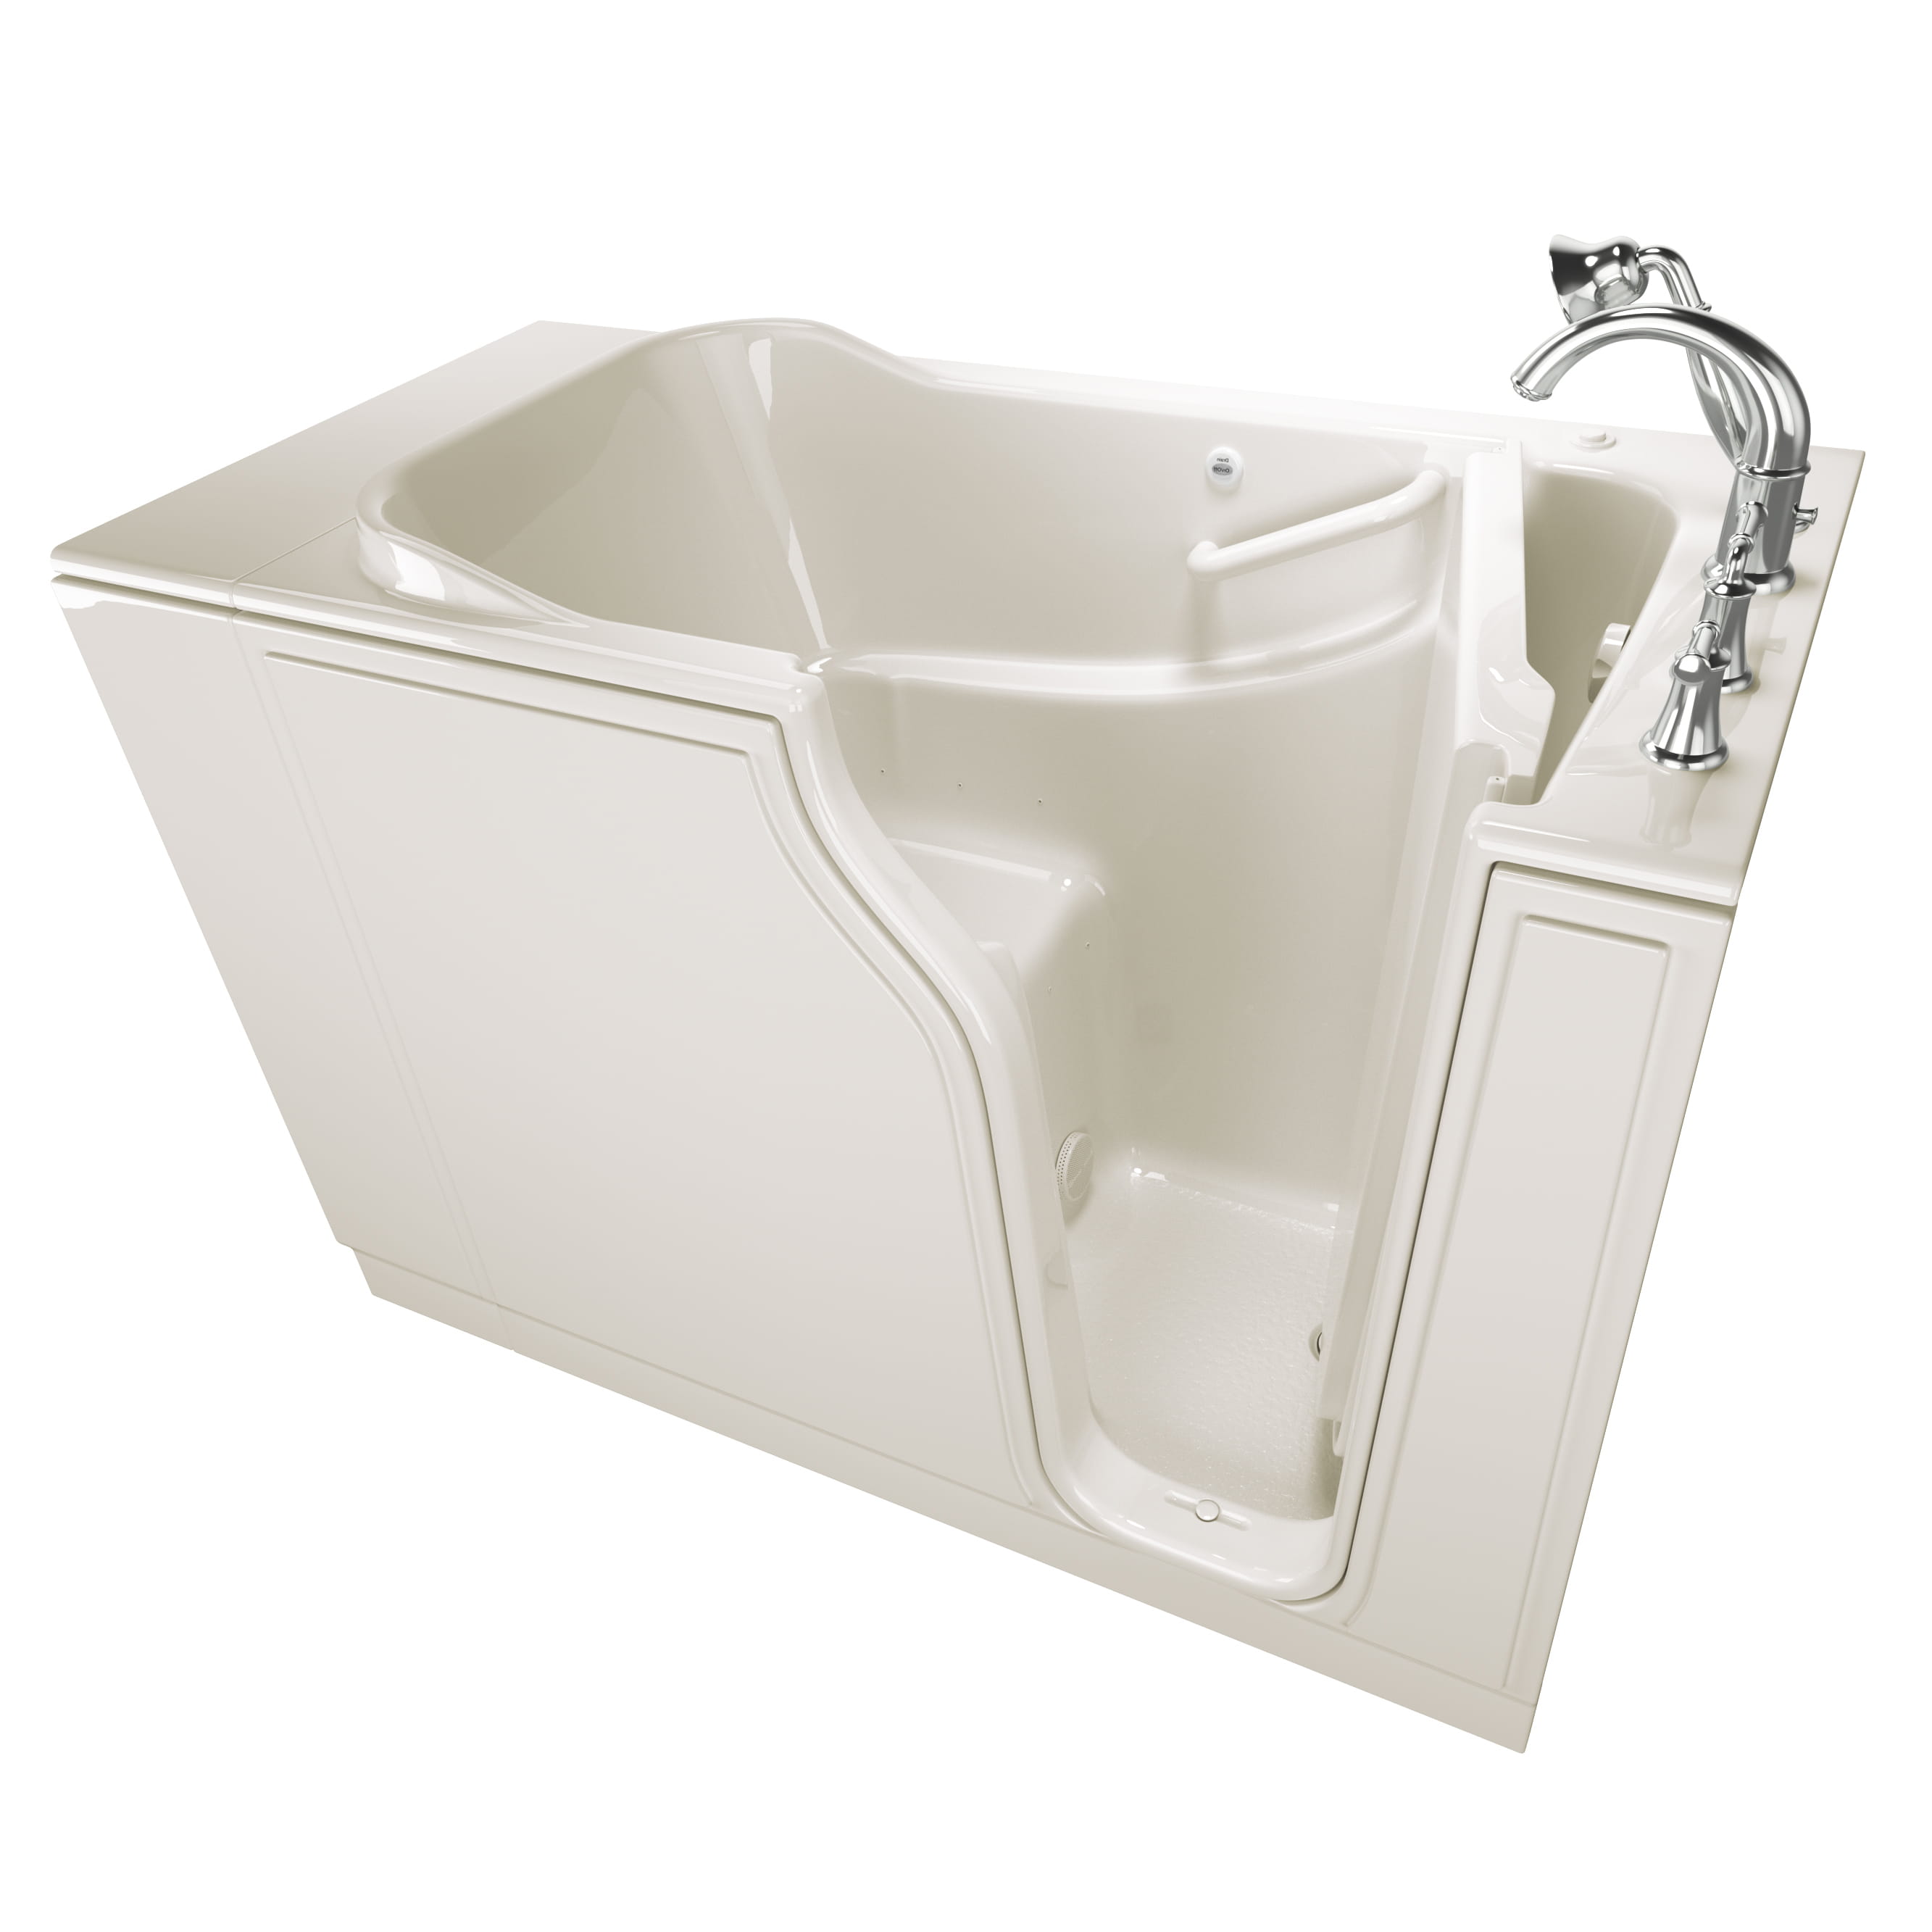 Gelcoat Value Series 30x52 Inch Walk In Bathtub with Air Spa System   Right Hand Door and Drain WIB LINEN